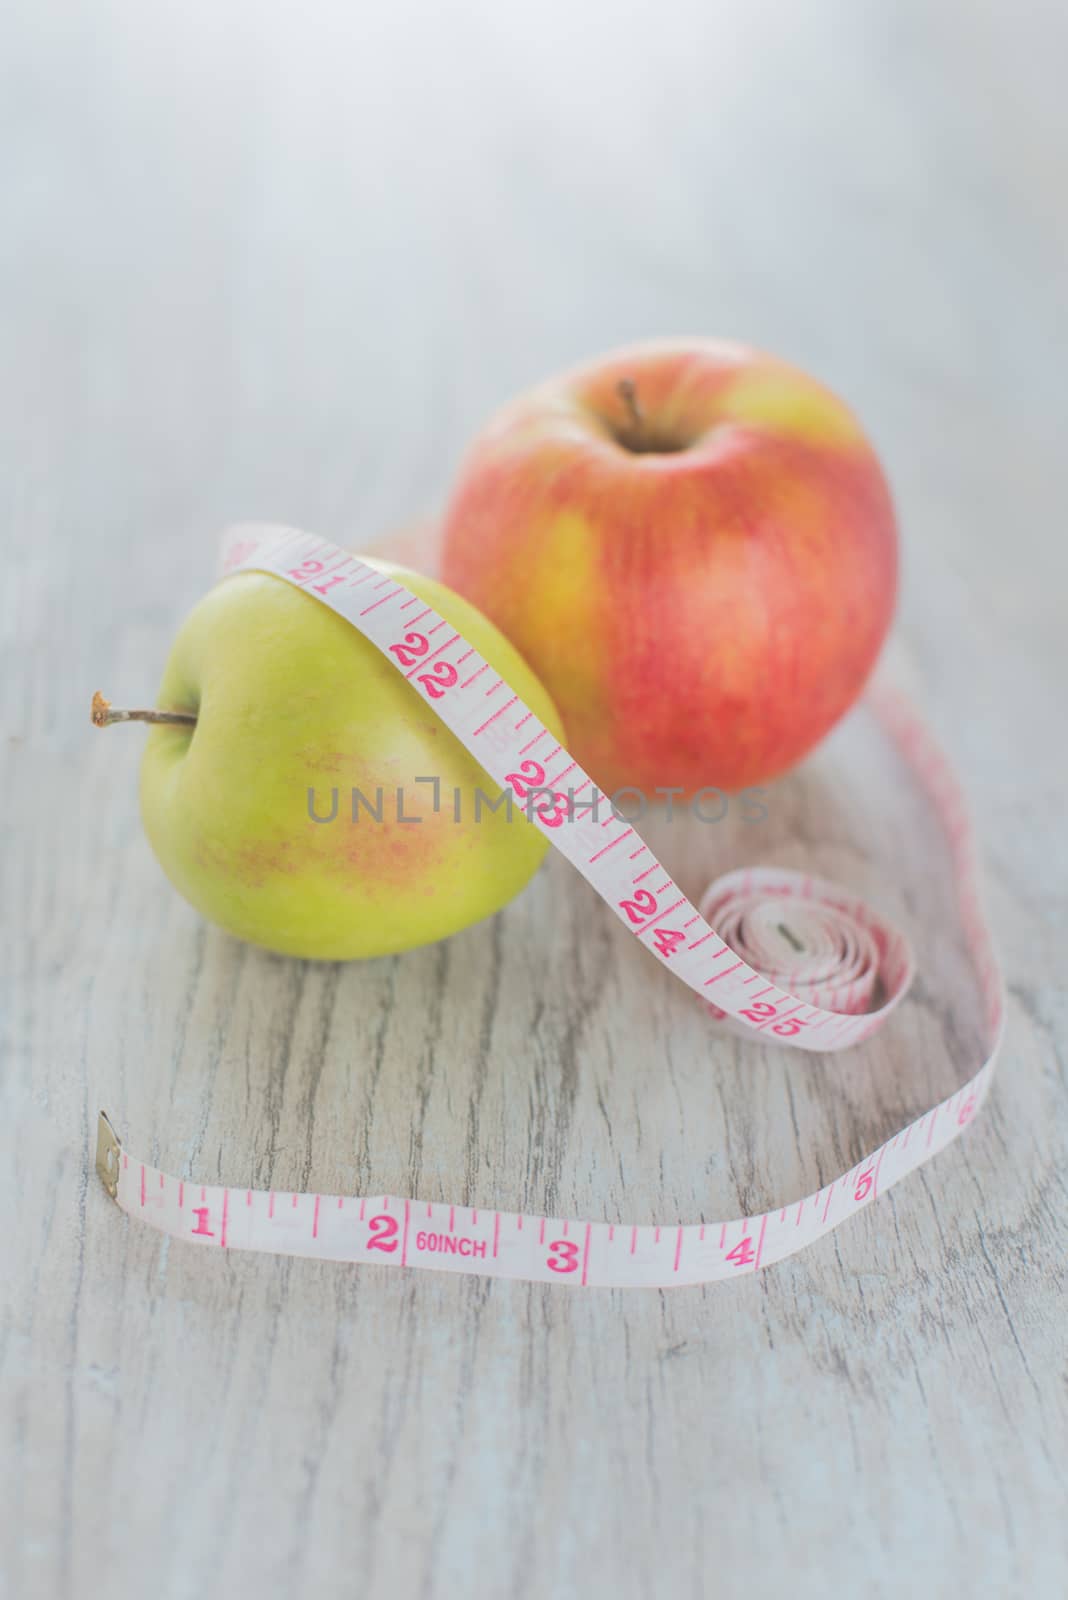 Apples in the measuring tape on the wood background